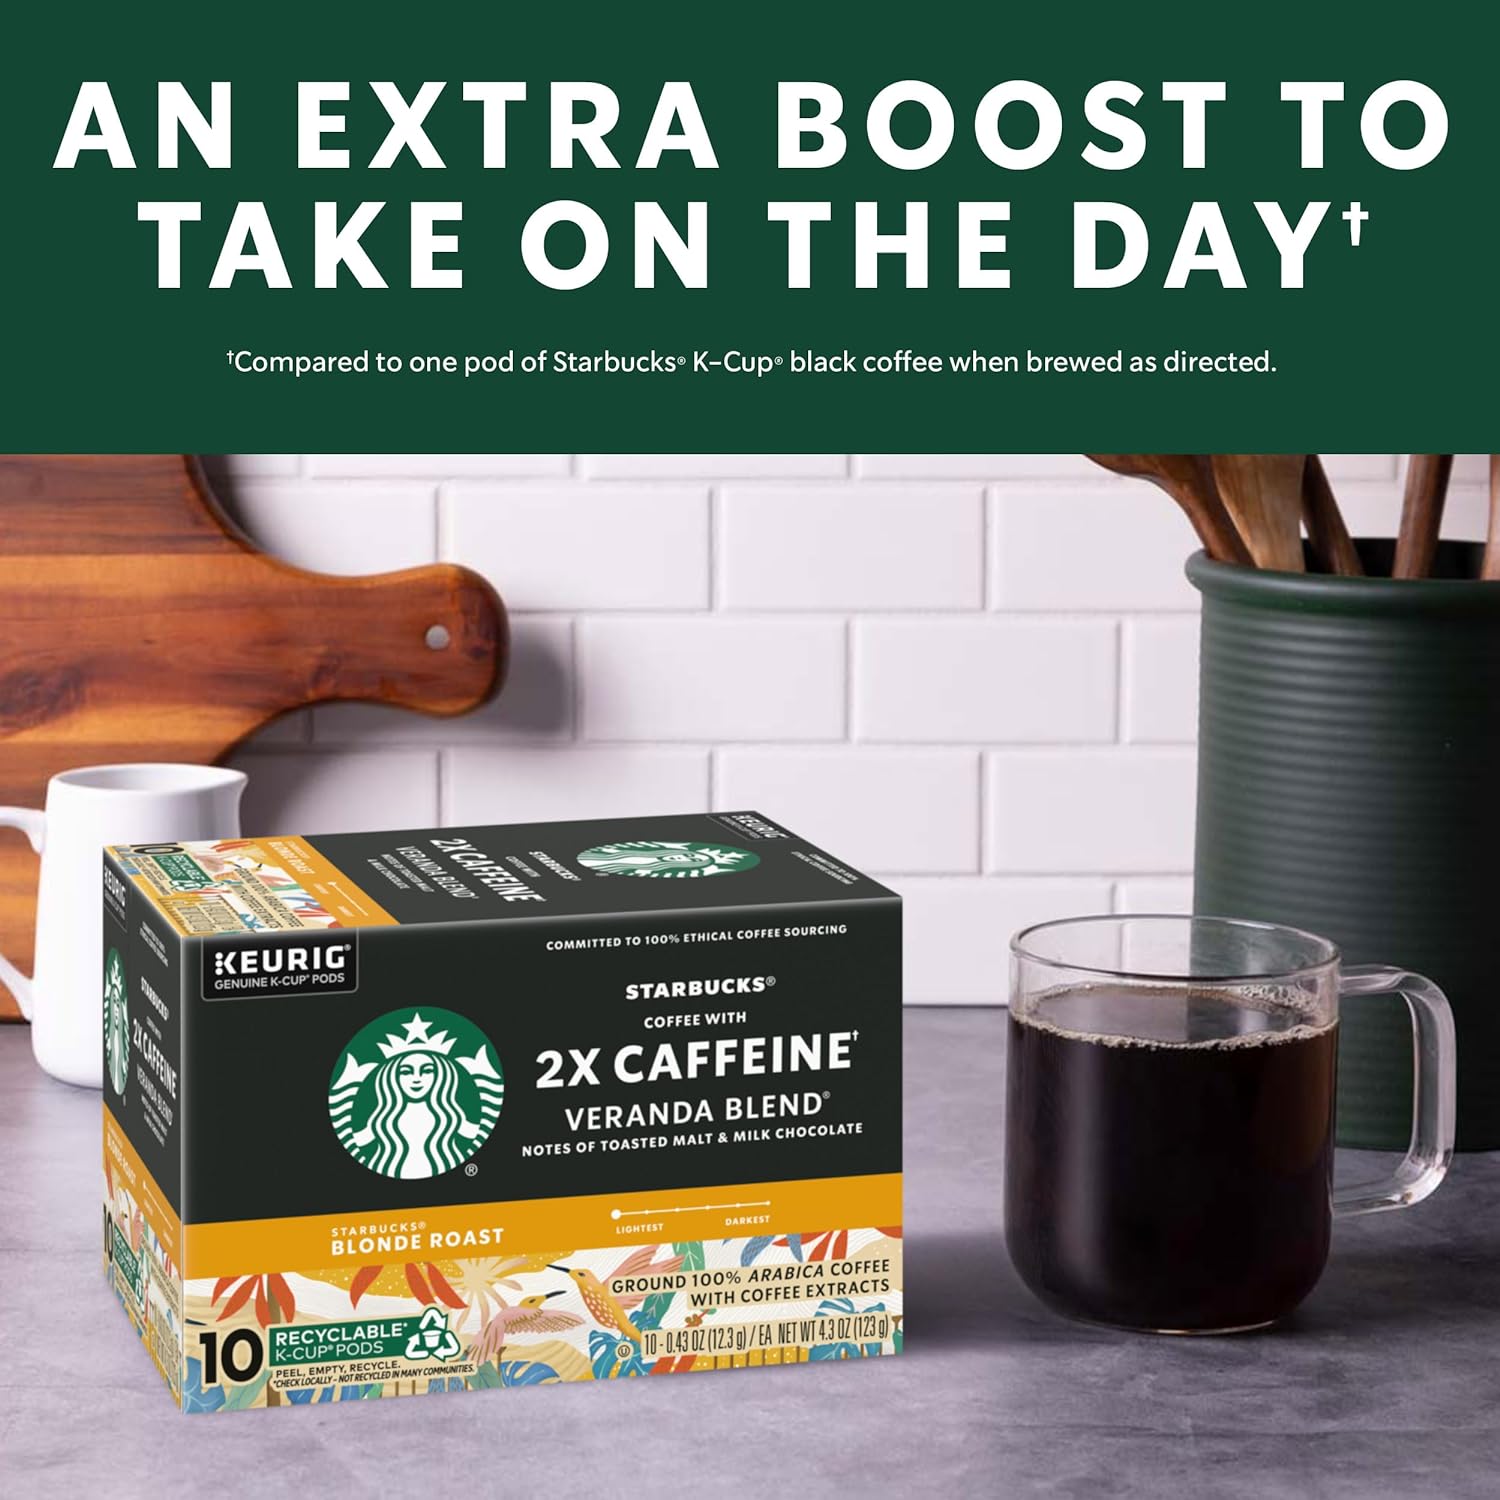 Starbucks K-Cup Coffee Pods, Starbucks Blonde Roast Coffee With 2X Caffeine Veranda Blend For Keurig Coffee Makers, 100% Arabica, 6 Boxes (60 Pods Total) : Everything Else